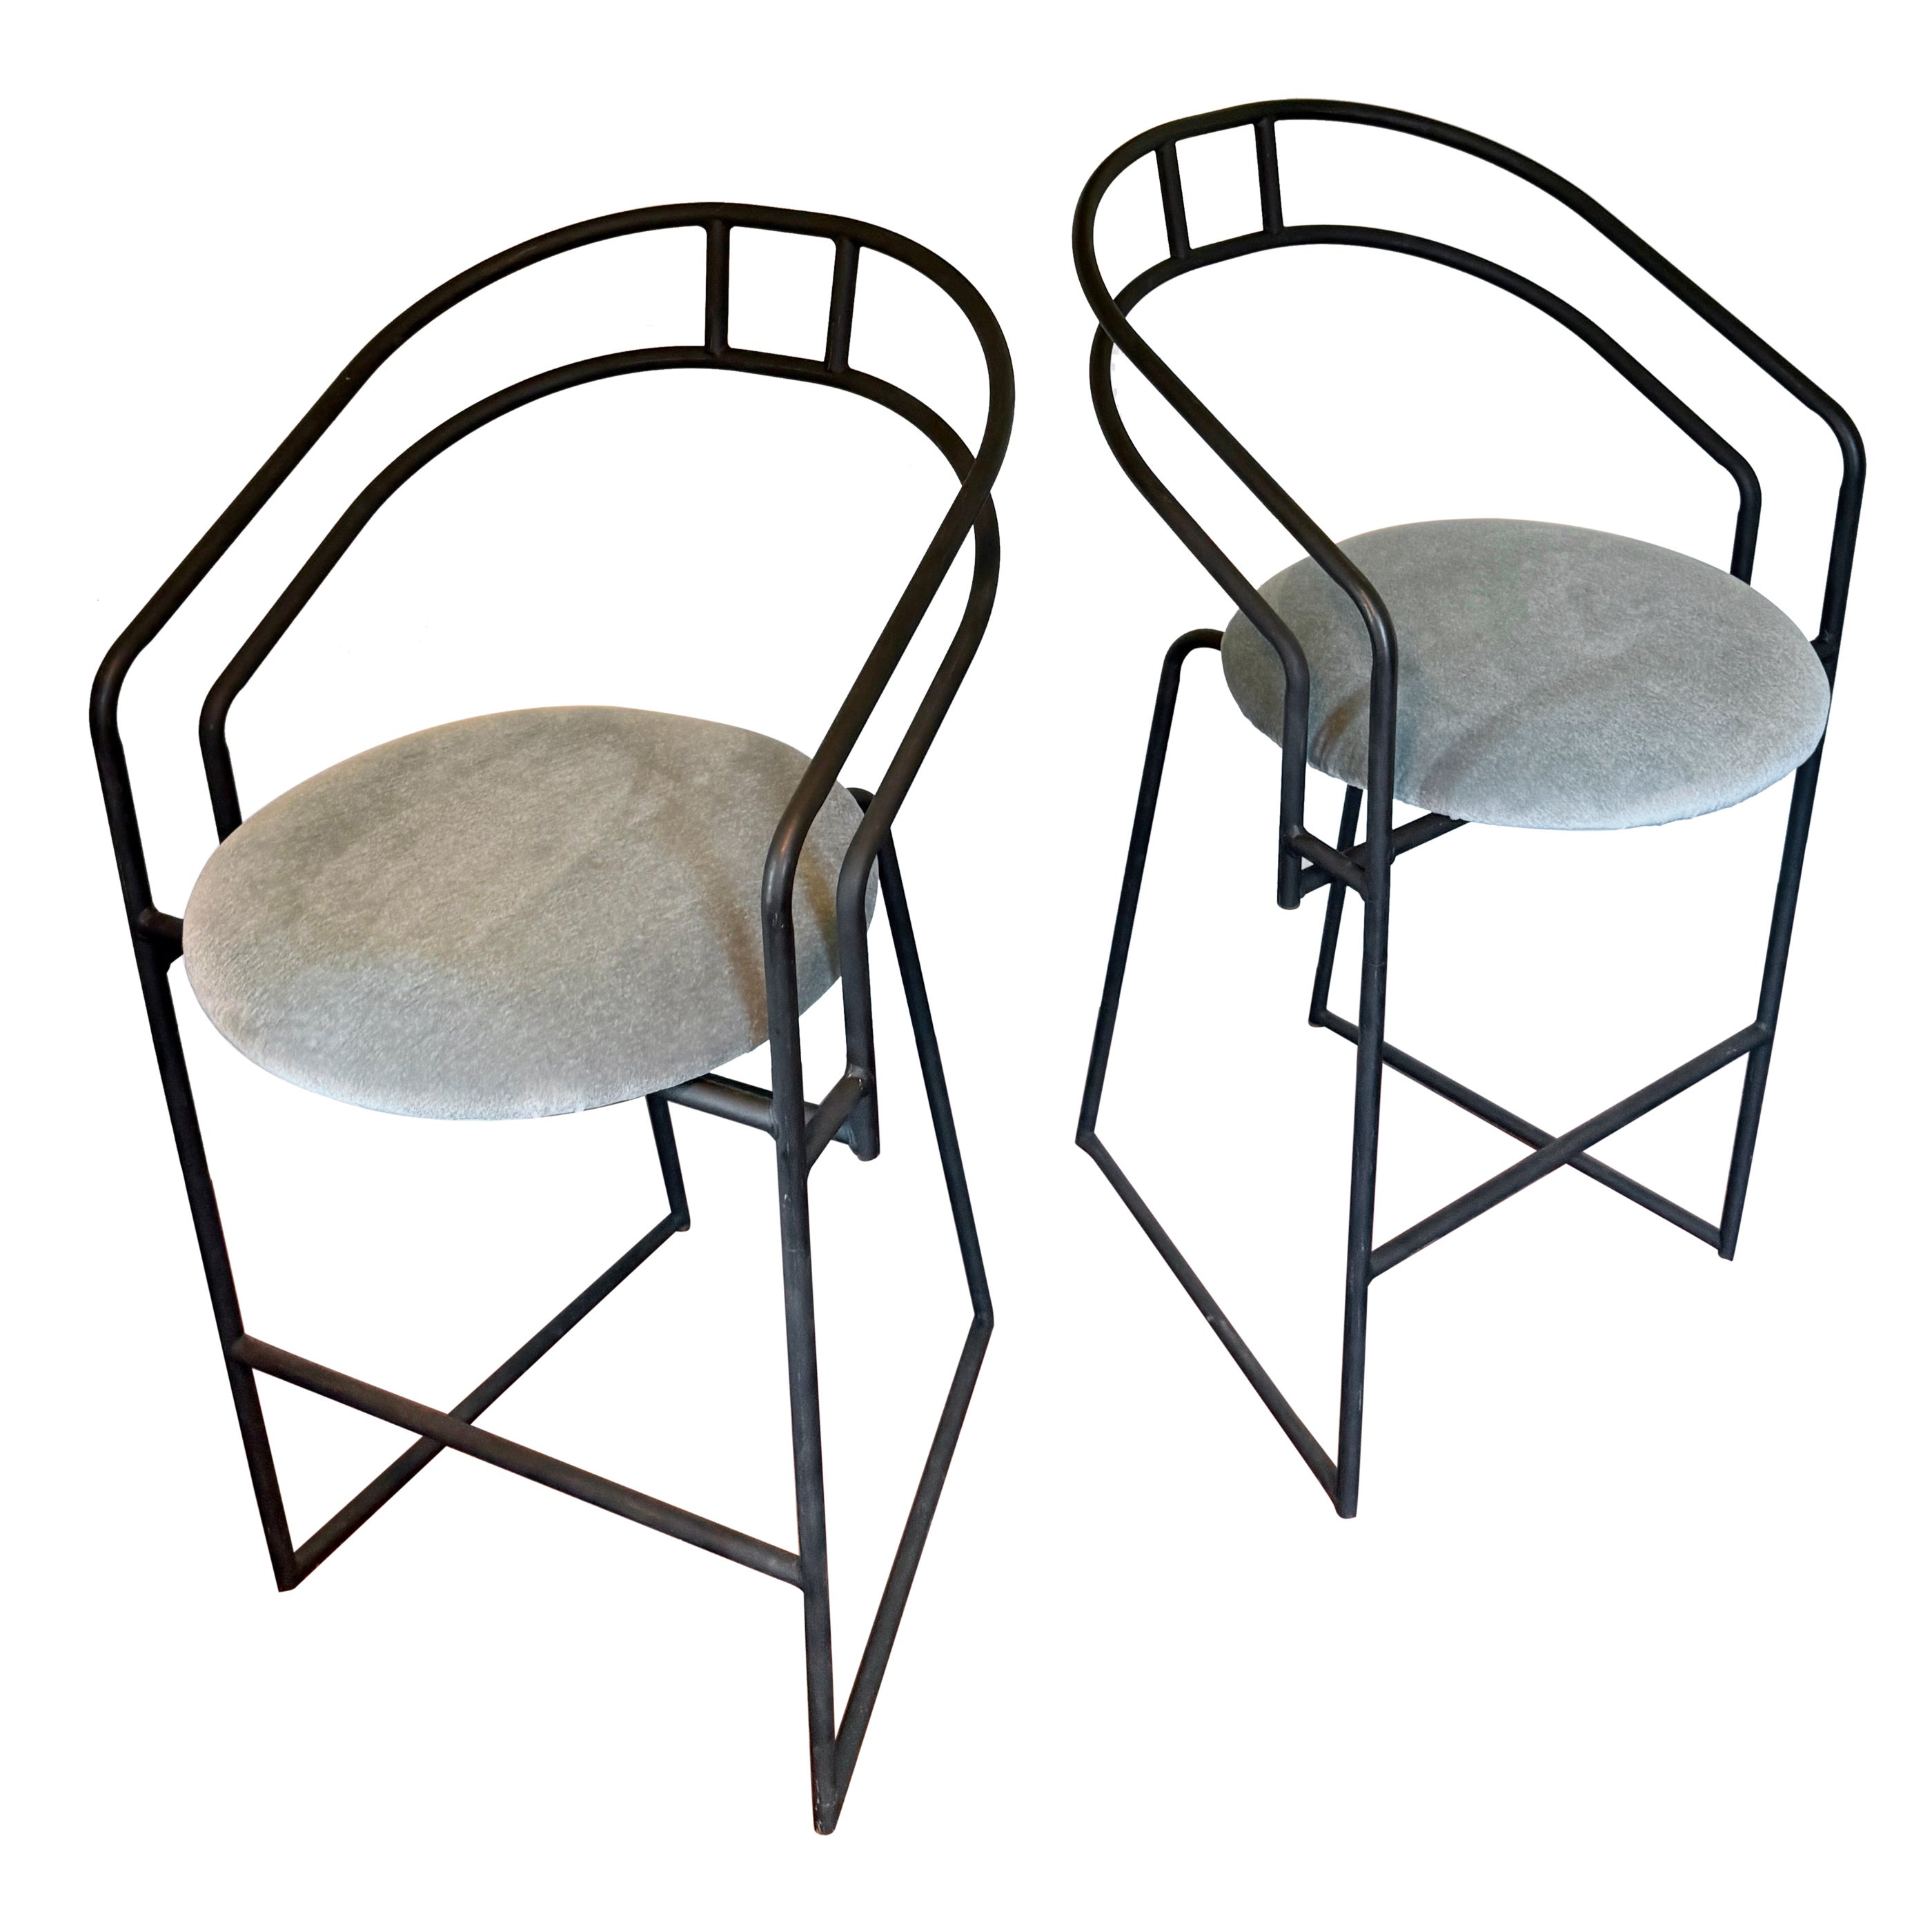 A set of Black Post Modern barstools by Cali-Style, circa 1980s